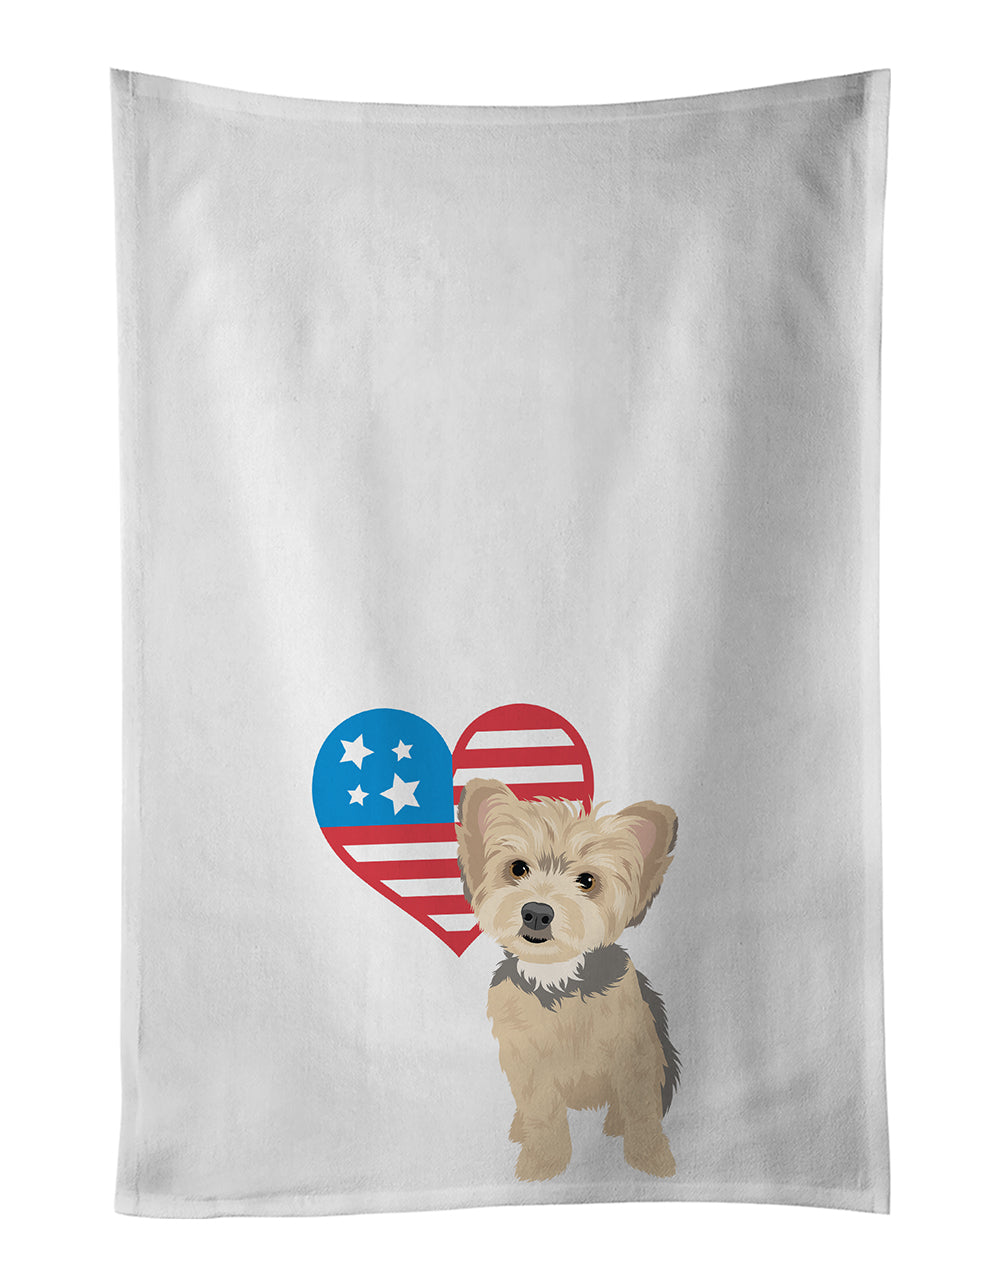 Buy this Yorkie Blue and Tan Puppy Patriotic White Kitchen Towel Set of 2